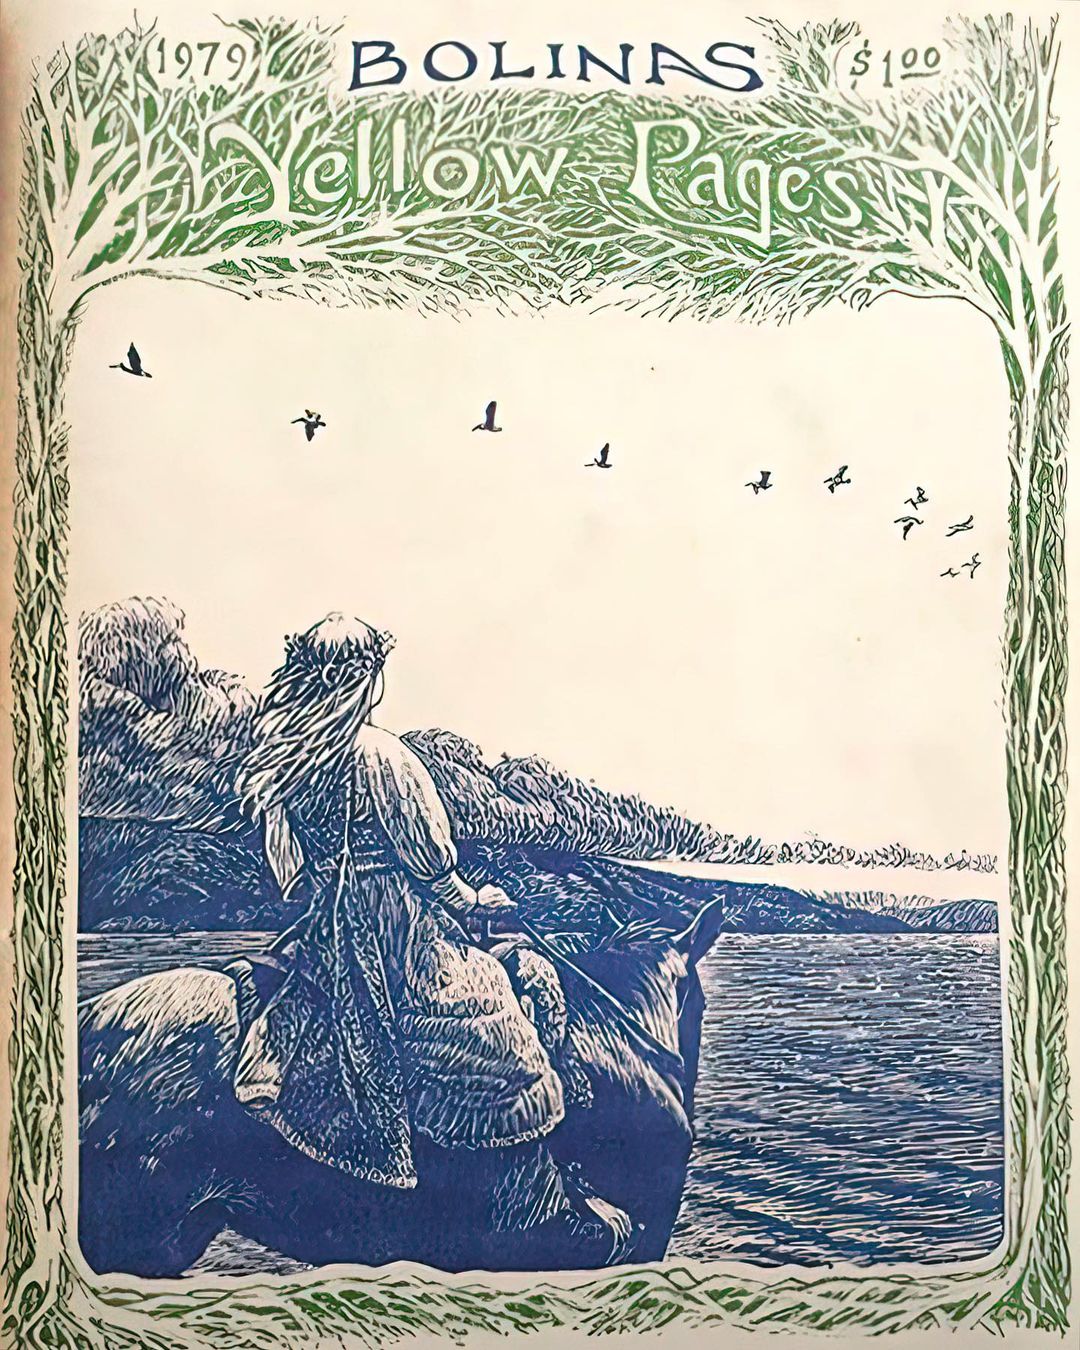 Bolinas Yellow Pages, 1979